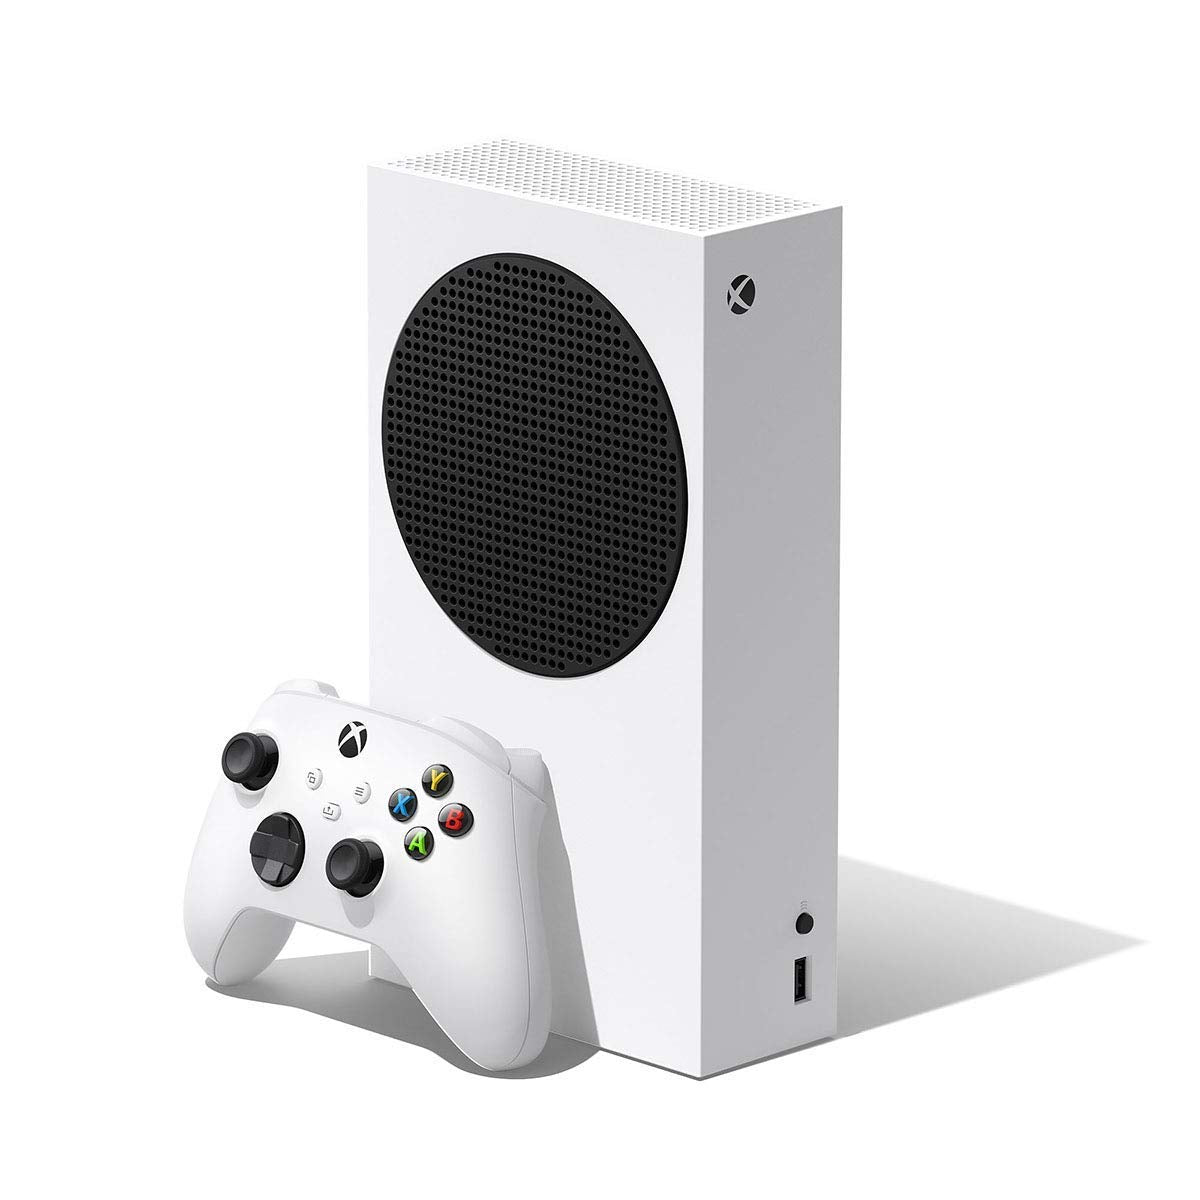 Microsoft Xbox Series S 512GB Game All-Digital Console + 1 Xbox Wireless1 Controller, White - 1440p Gaming Resolution, 4K Streaming Media Playback, WiFi (Refurbished)